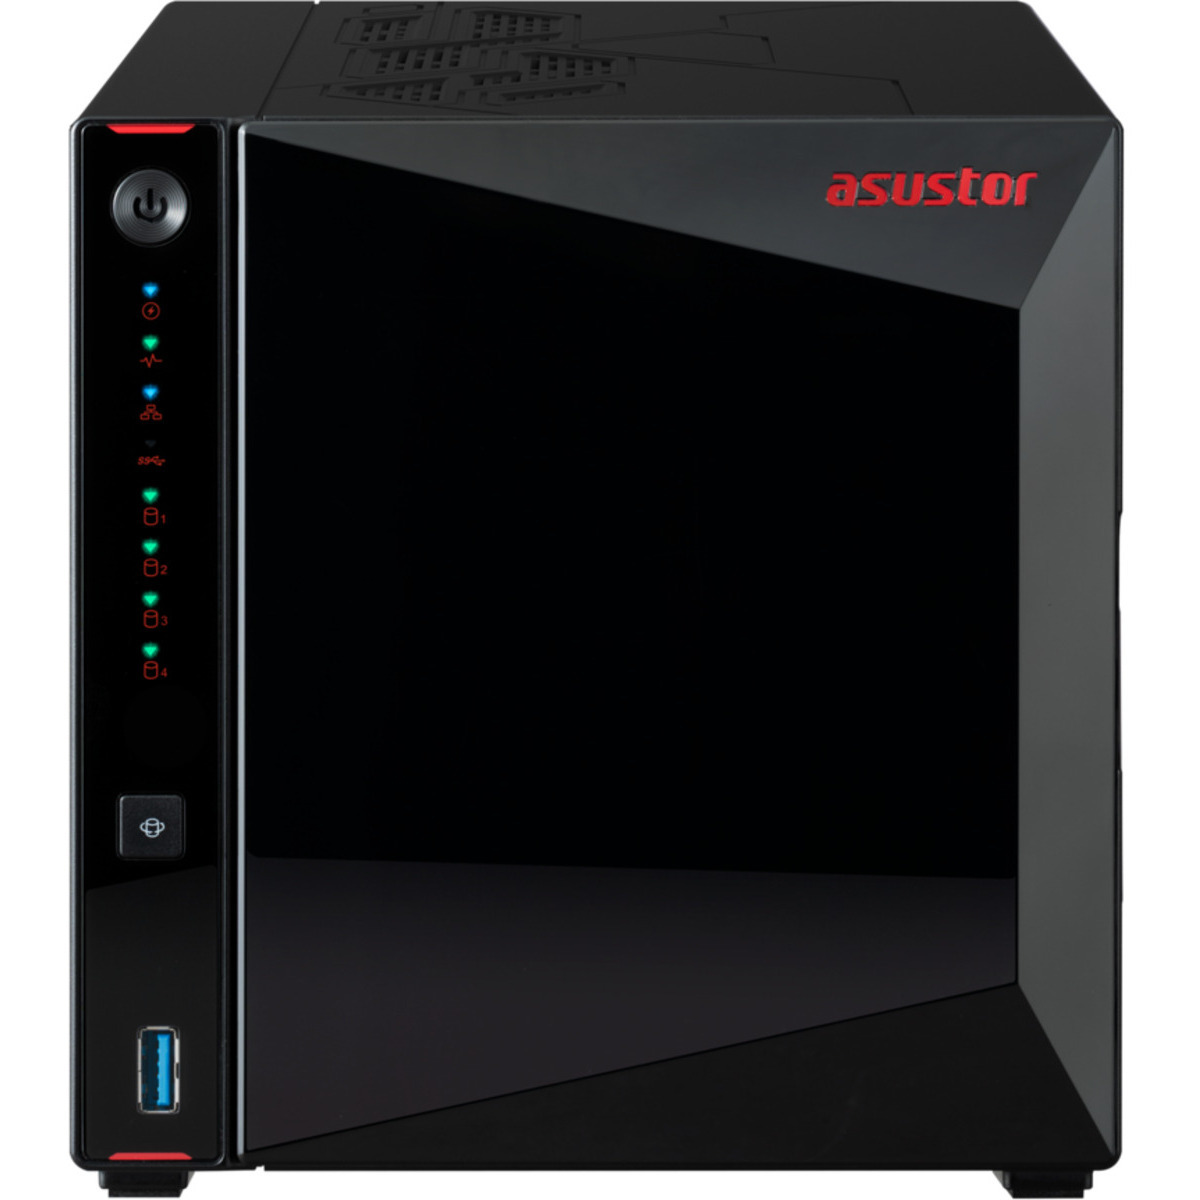 ASUSTOR Nimbustor 4 Gen2 AS5404T 2tb 4-Bay Desktop Multimedia / Power User / Business NAS - Network Attached Storage Device 2x1tb Western Digital Red SA500 WDS100T1R0A 2.5 560/530MB/s SATA 6Gb/s SSD NAS Class Drives Installed - Burn-In Tested - FREE RAM UPGRADE Nimbustor 4 Gen2 AS5404T